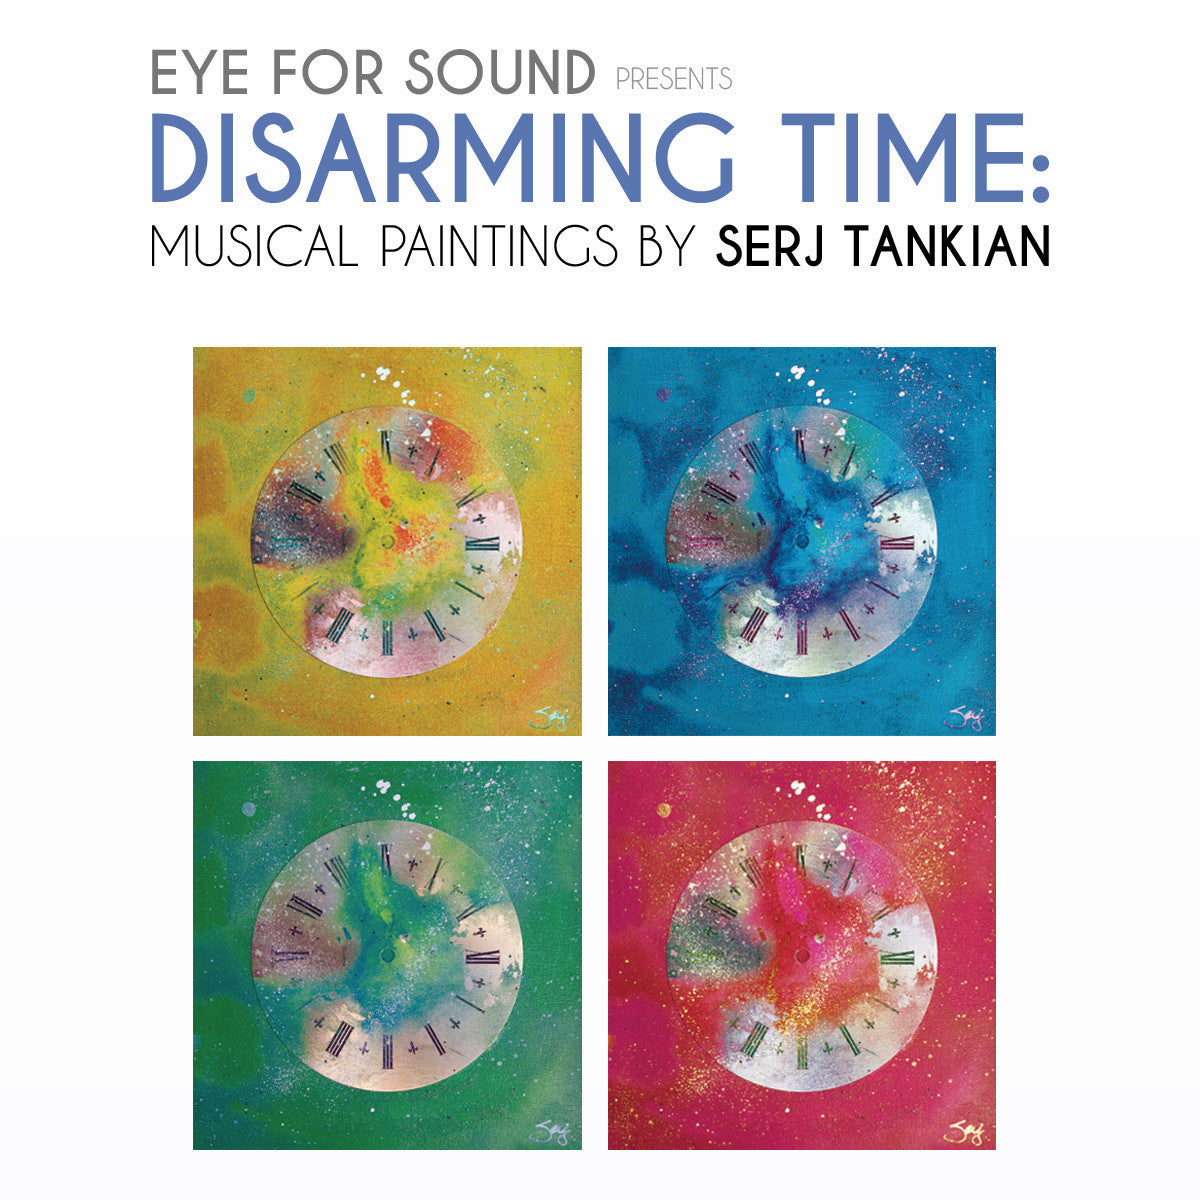 Eye For Sound Presents: Disarming Time Musical Paintings by Serj Tankian